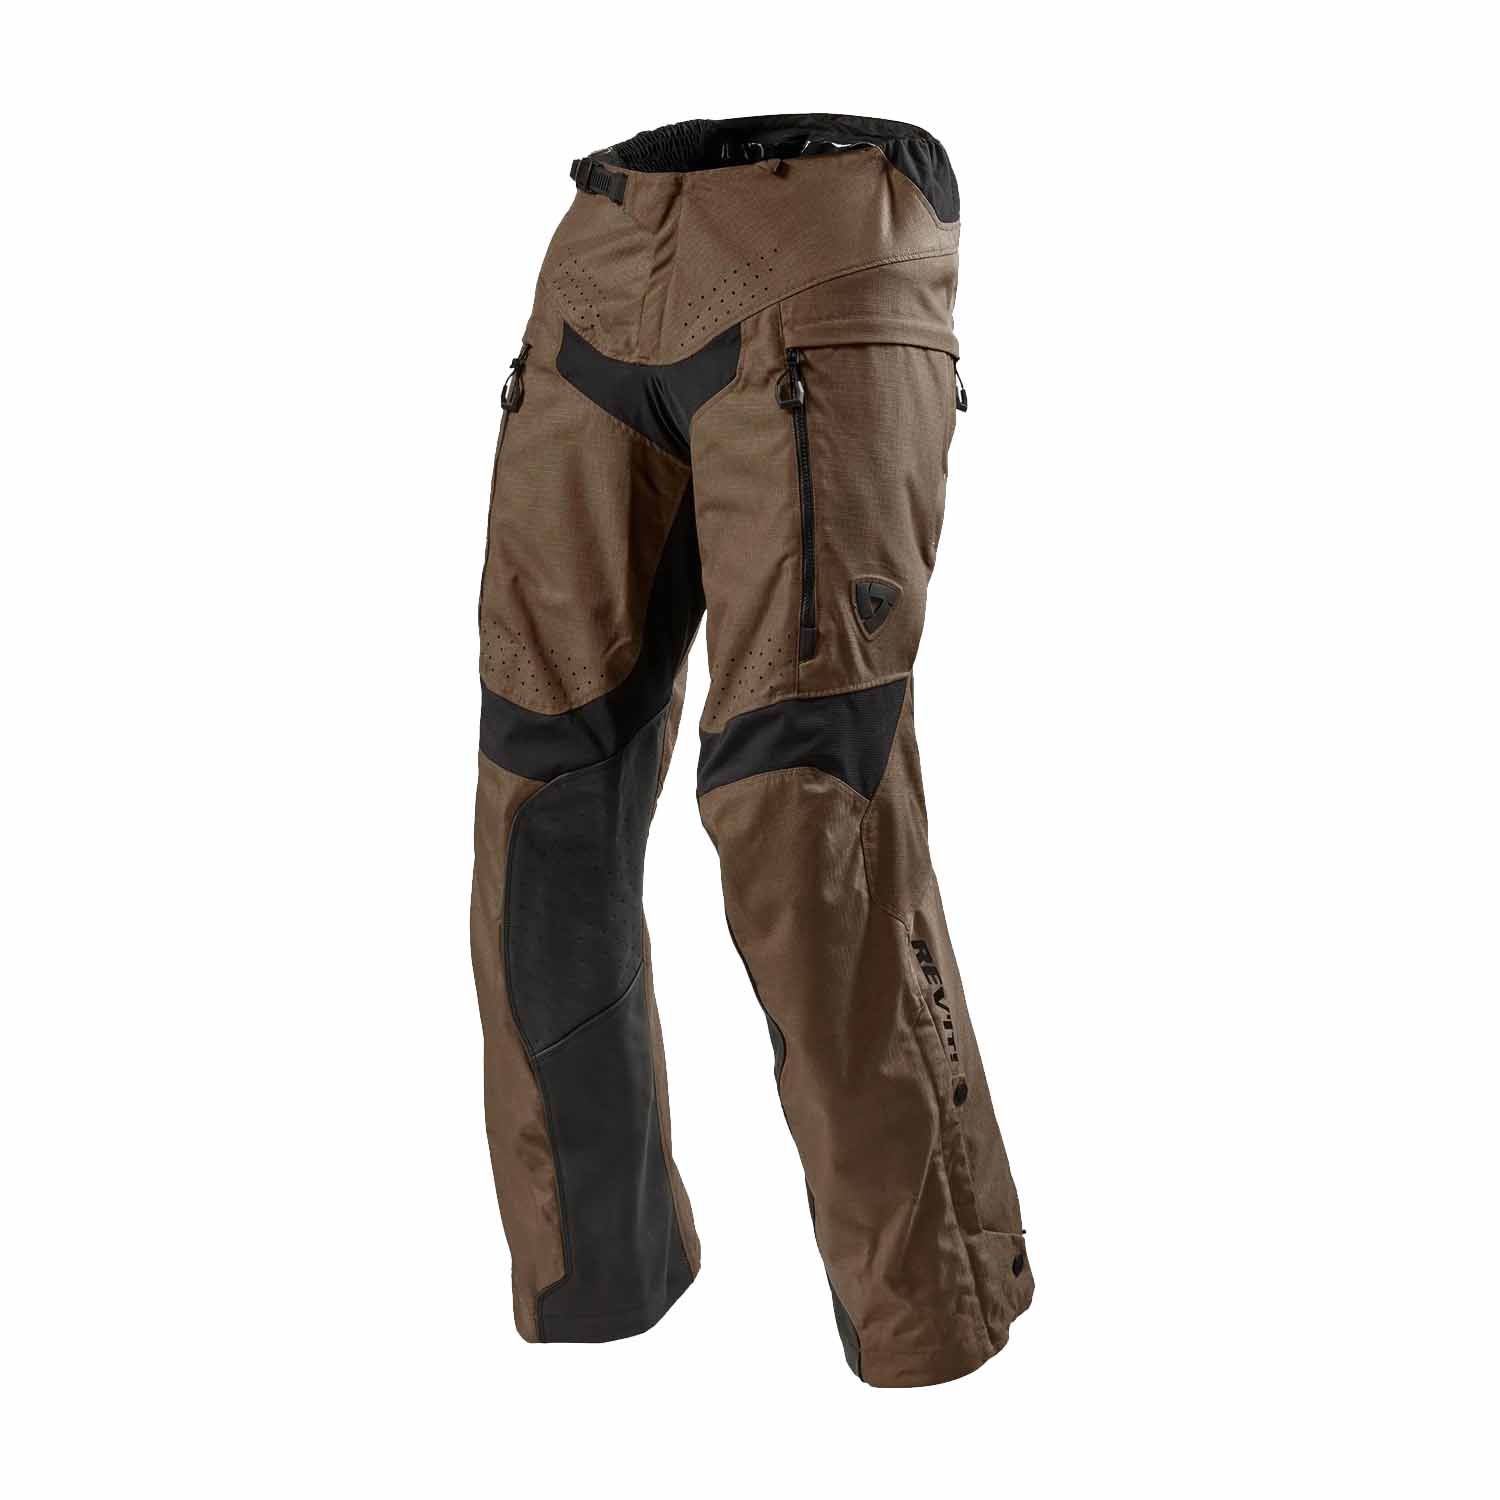 Image of REV'IT! Continent Pants Brown Short Size M ID 8700001369329